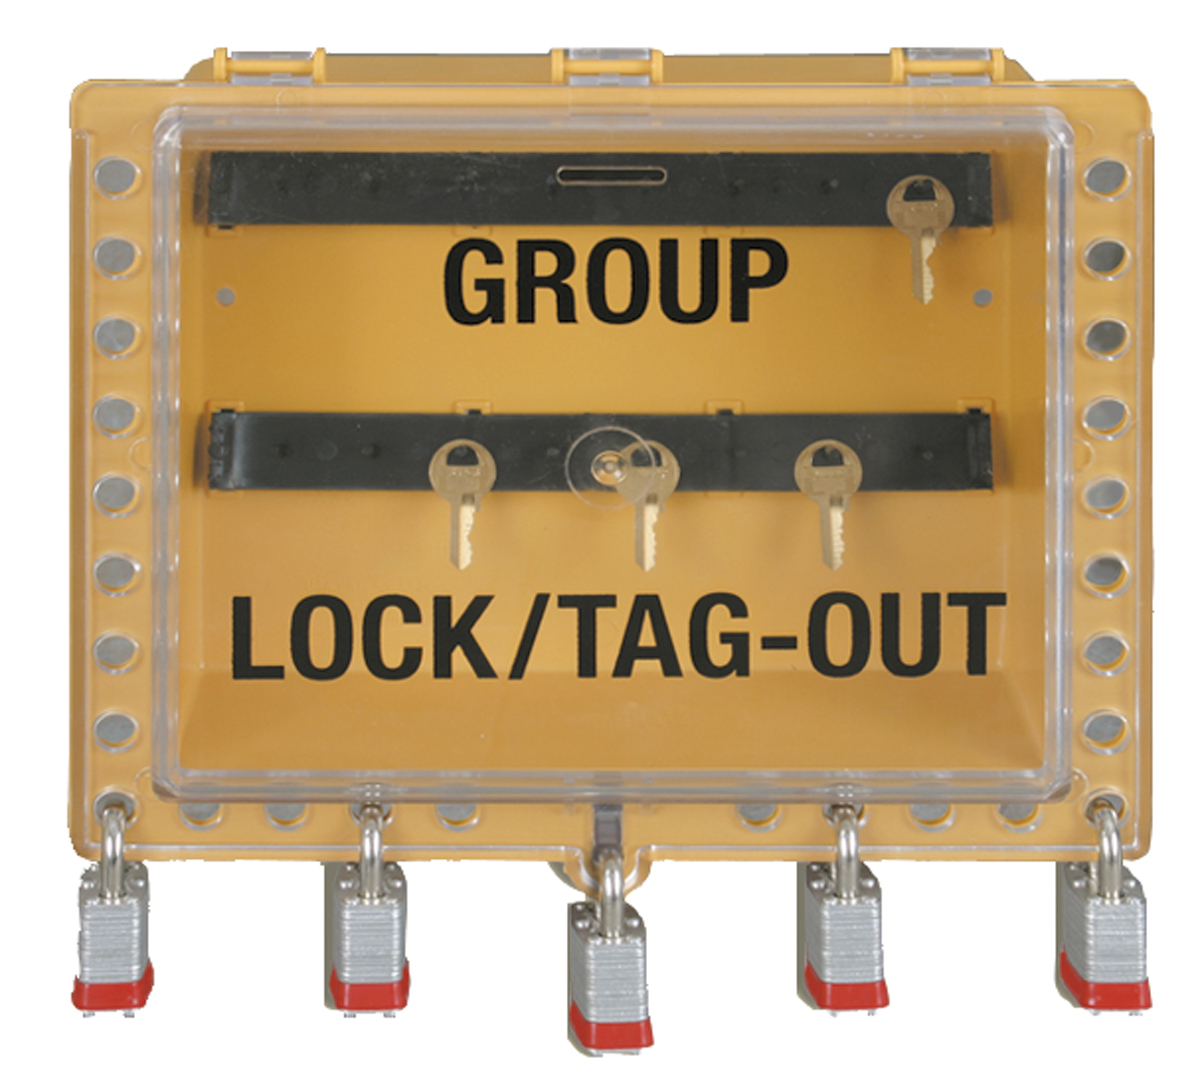 LOCK/TAG-OUT